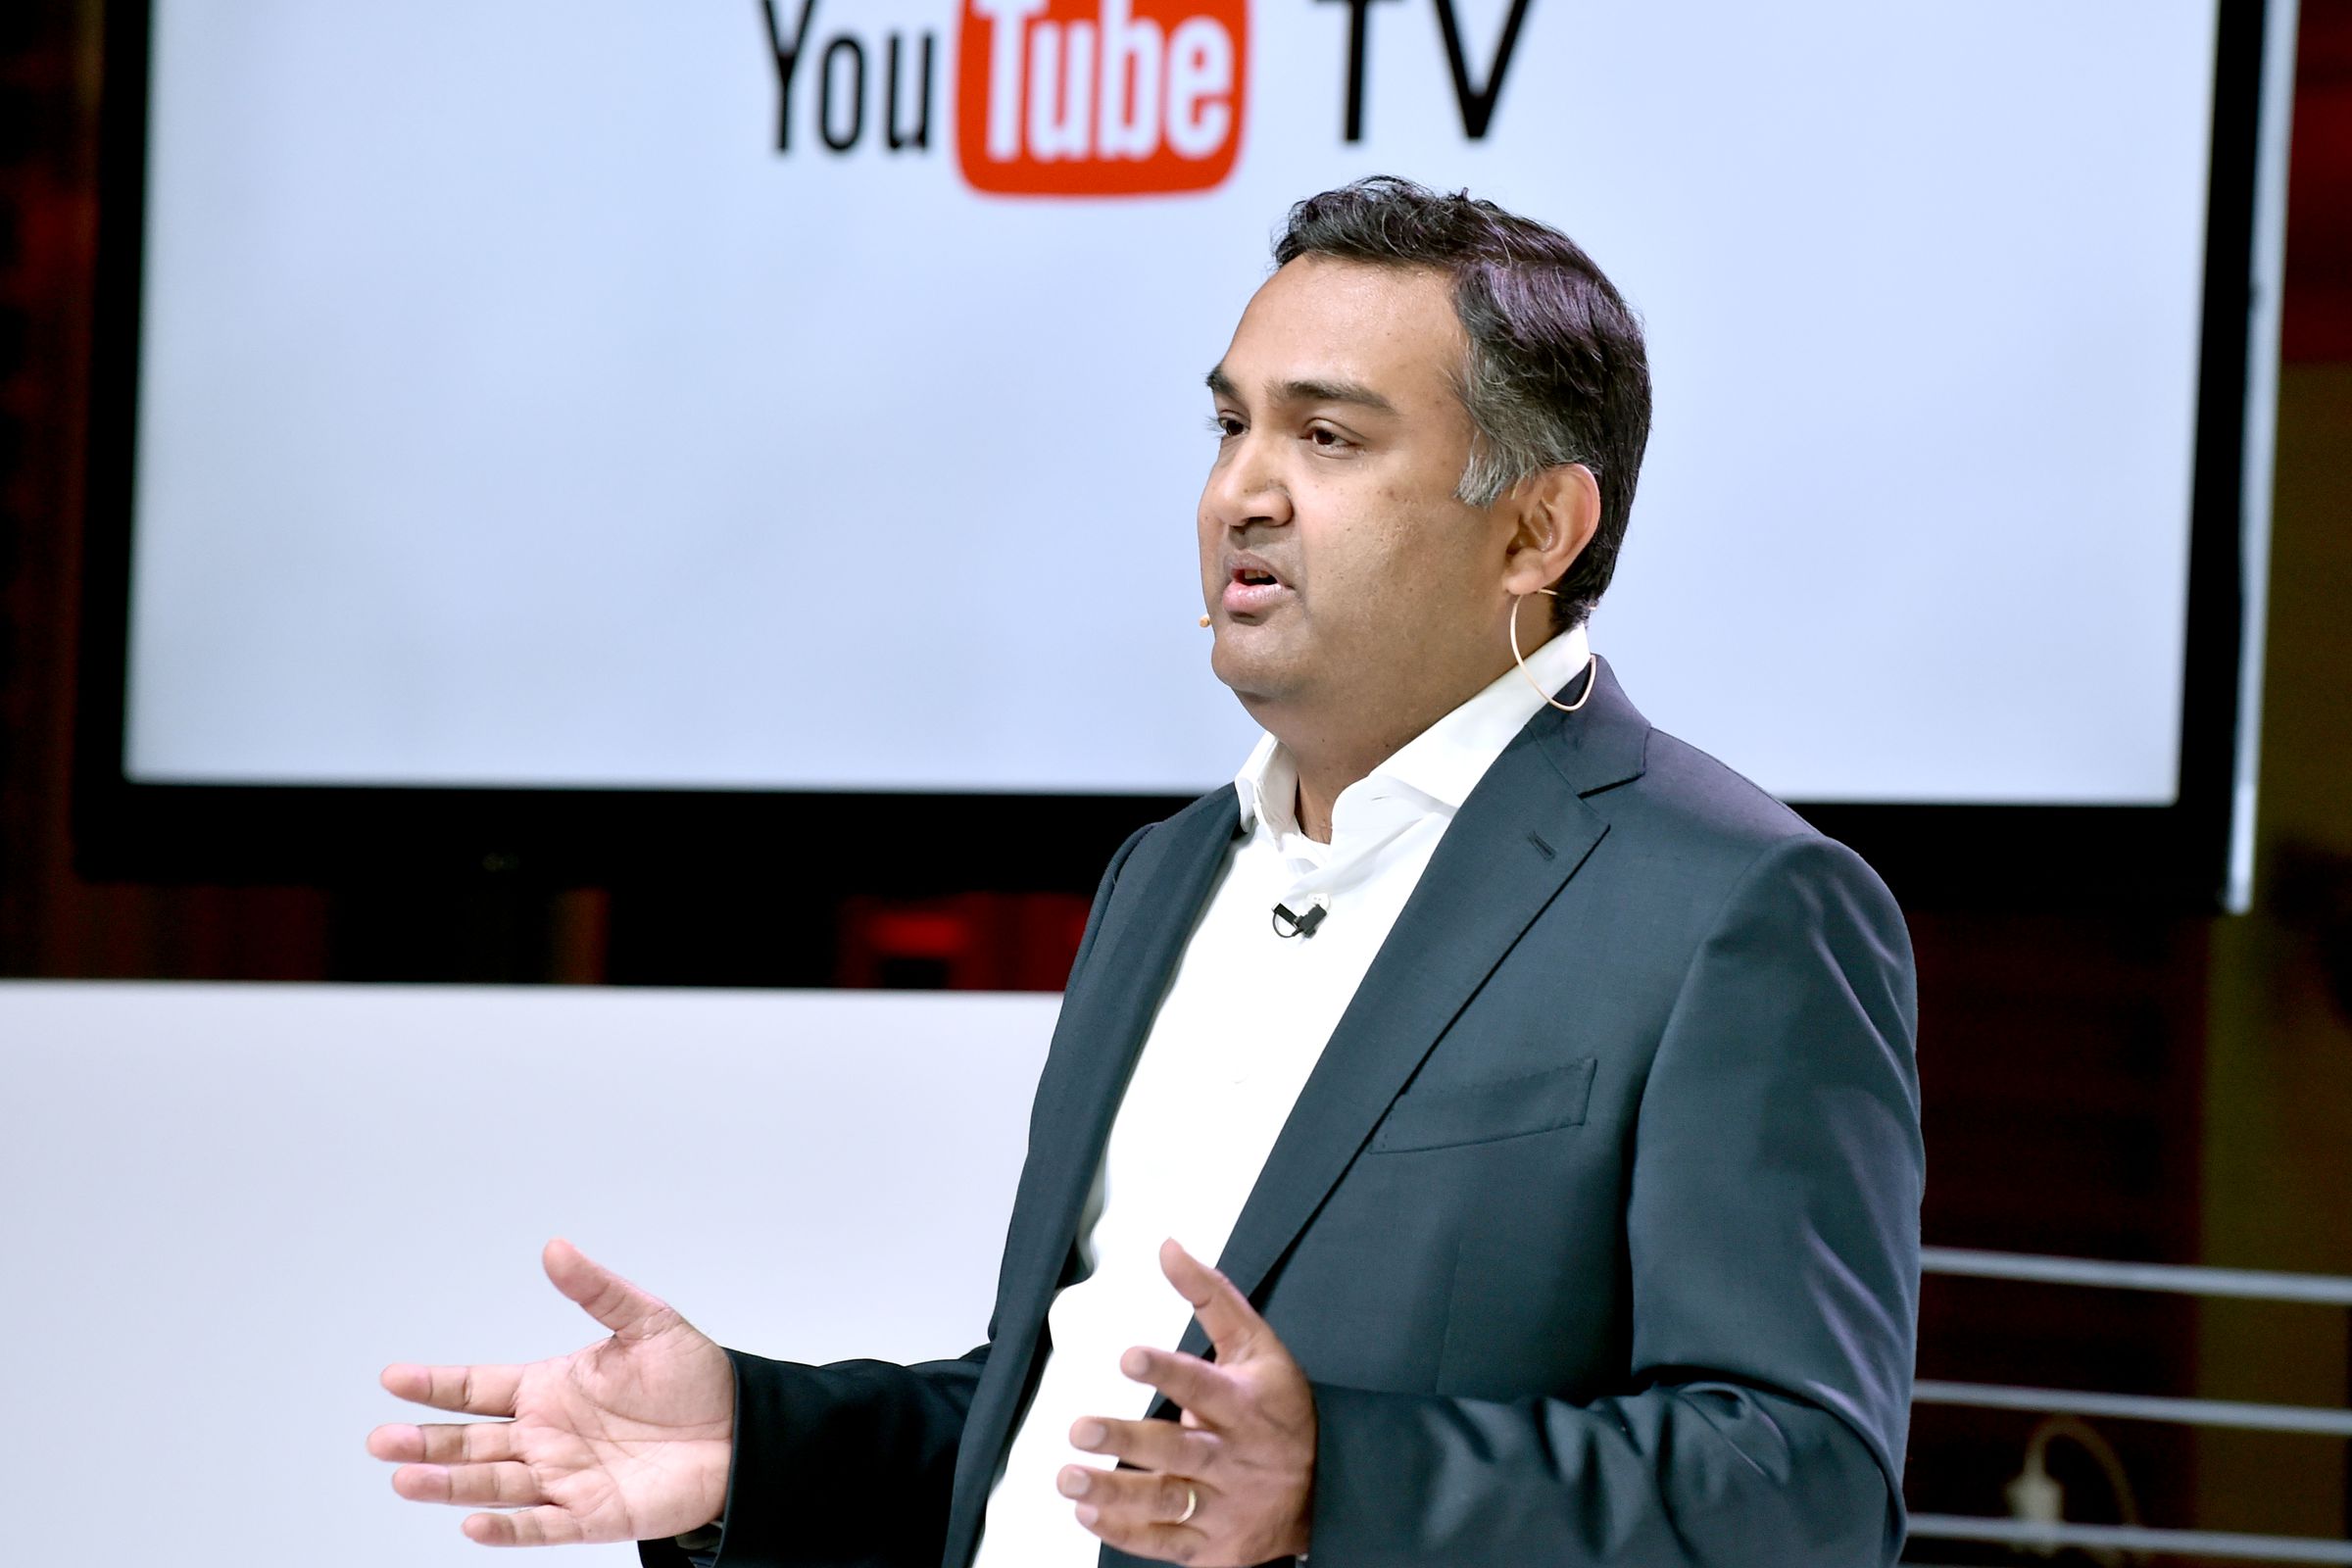 Neal Mohan, the new head of YouTube onstage presenting during the announcement for YouTube TV.